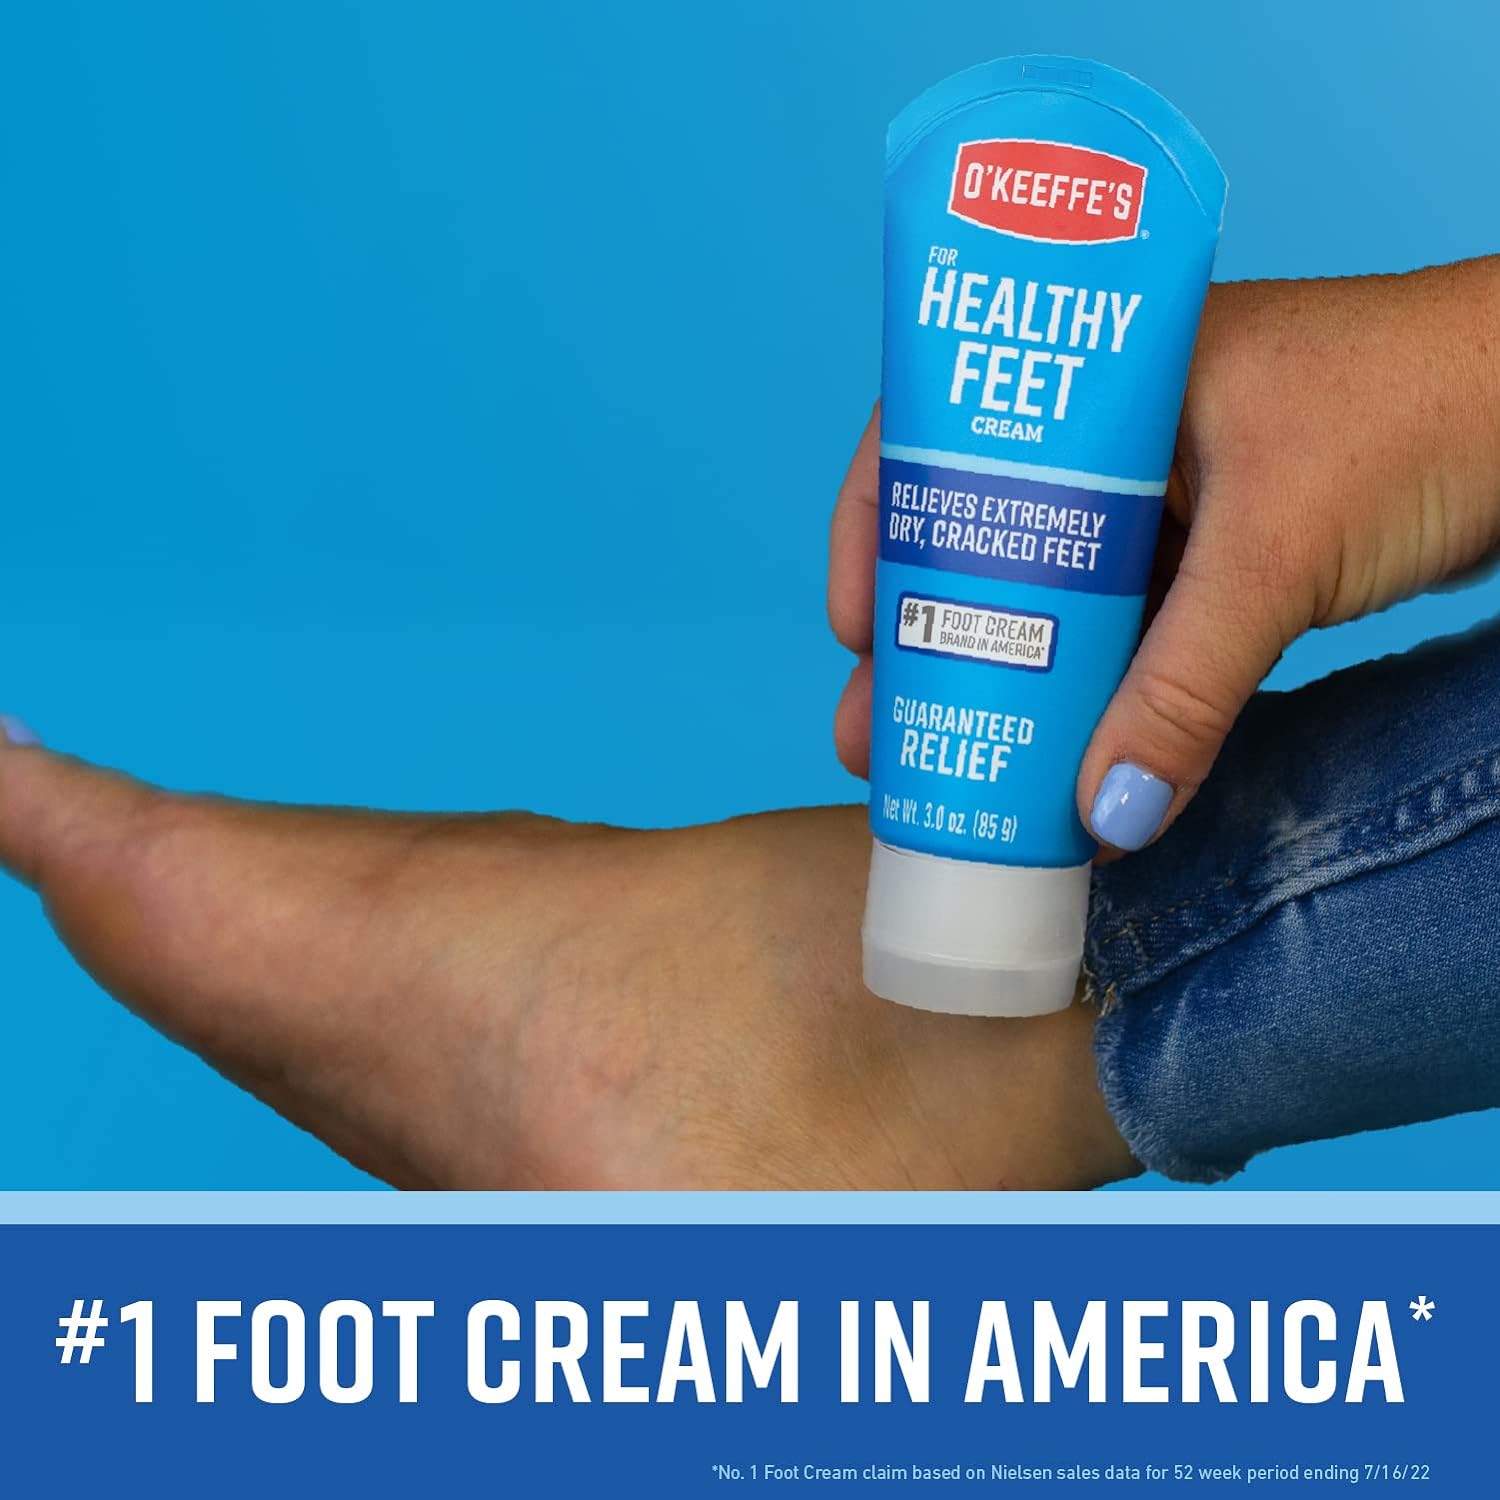 O'Keeffe's for Healthy Feet Foot Cream, Guaranteed Relief for Extremely Dry, Cracked Feet, Clinically Proven to Instantly Boost Moisture Levels, 3.0 Ounce Tube, (Pack of 2) : Beauty & Personal Care